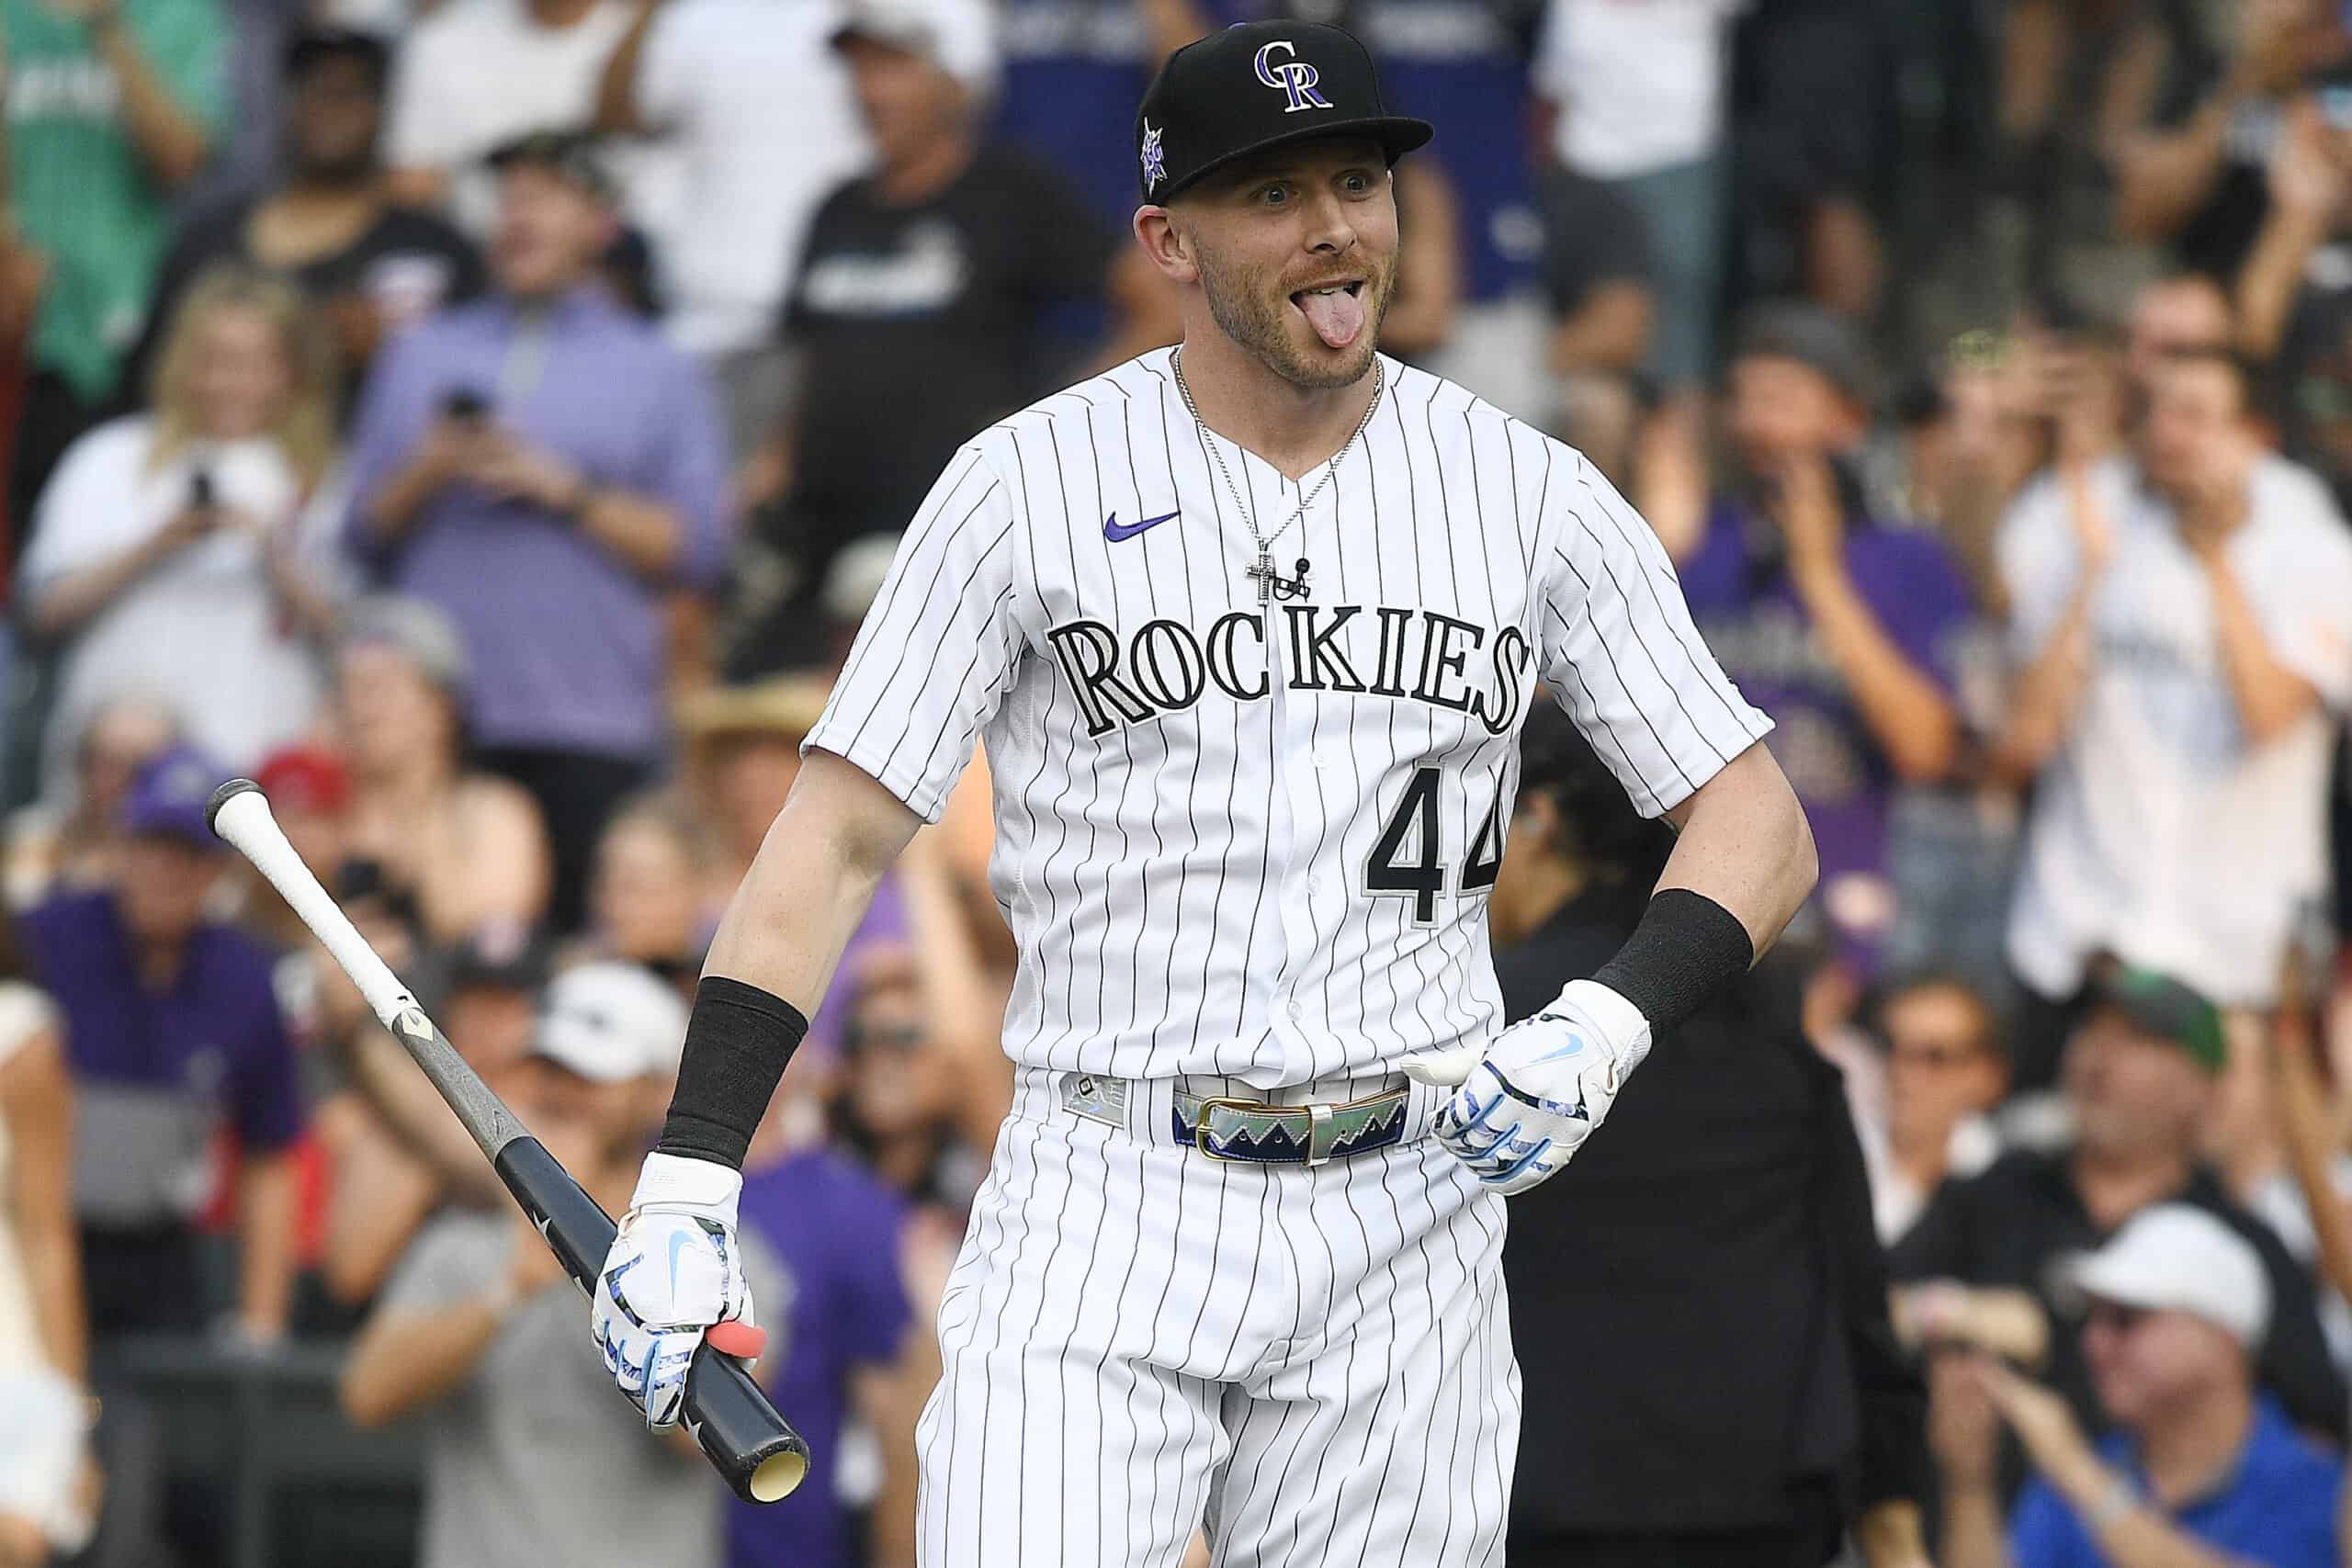 Trevor Story Age: How Old Is Trevor Story? Where Is Trevor Story From?